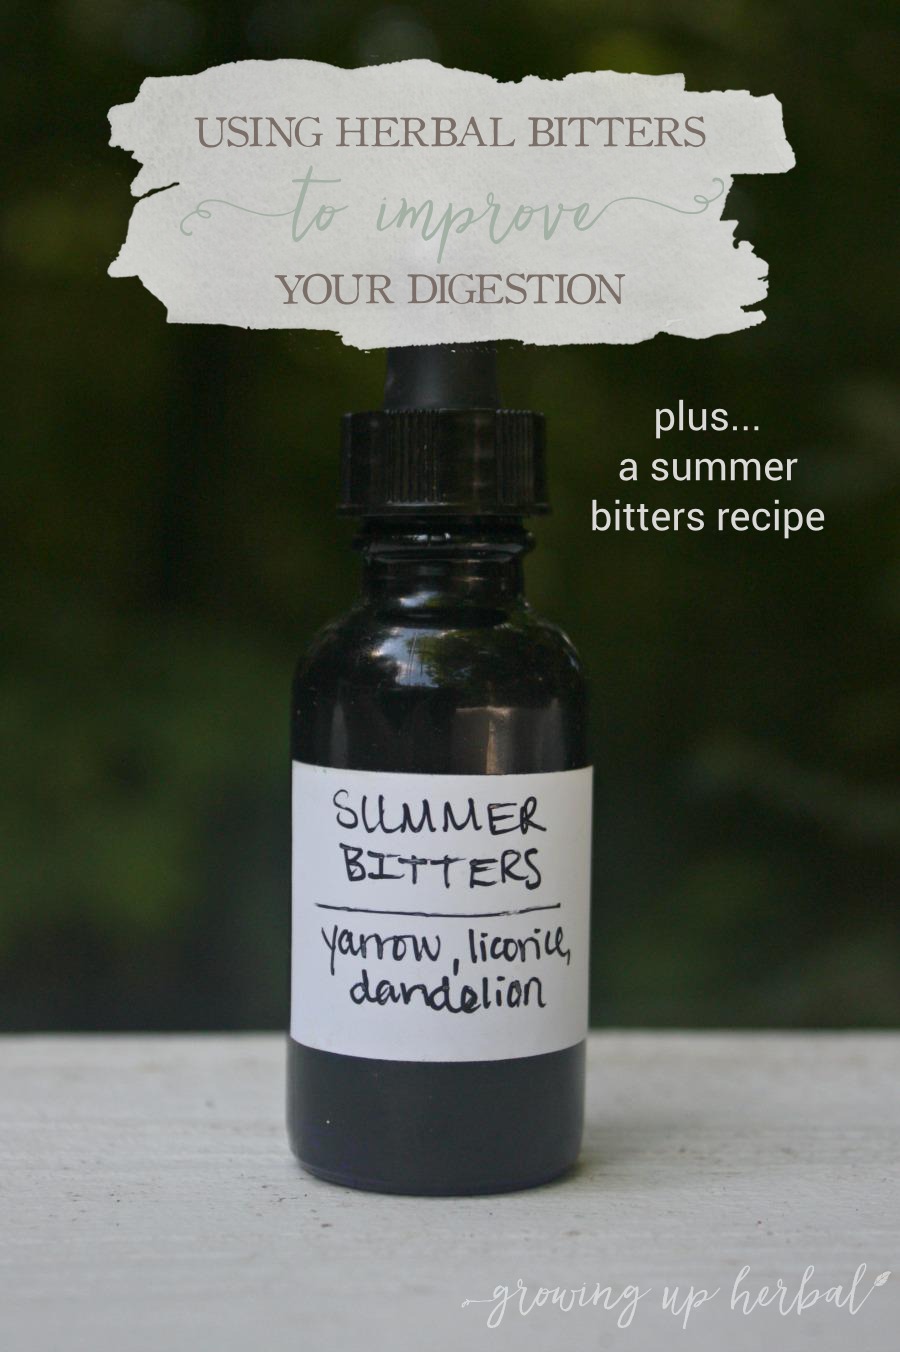 Using Herbal Bitters To Improve Your Digestions + A Summer "Bitters" Recipe | GrowingUpHerbal.com | Learn why "bitters" are so good for your digestion and get your own summer bitters recipe too!